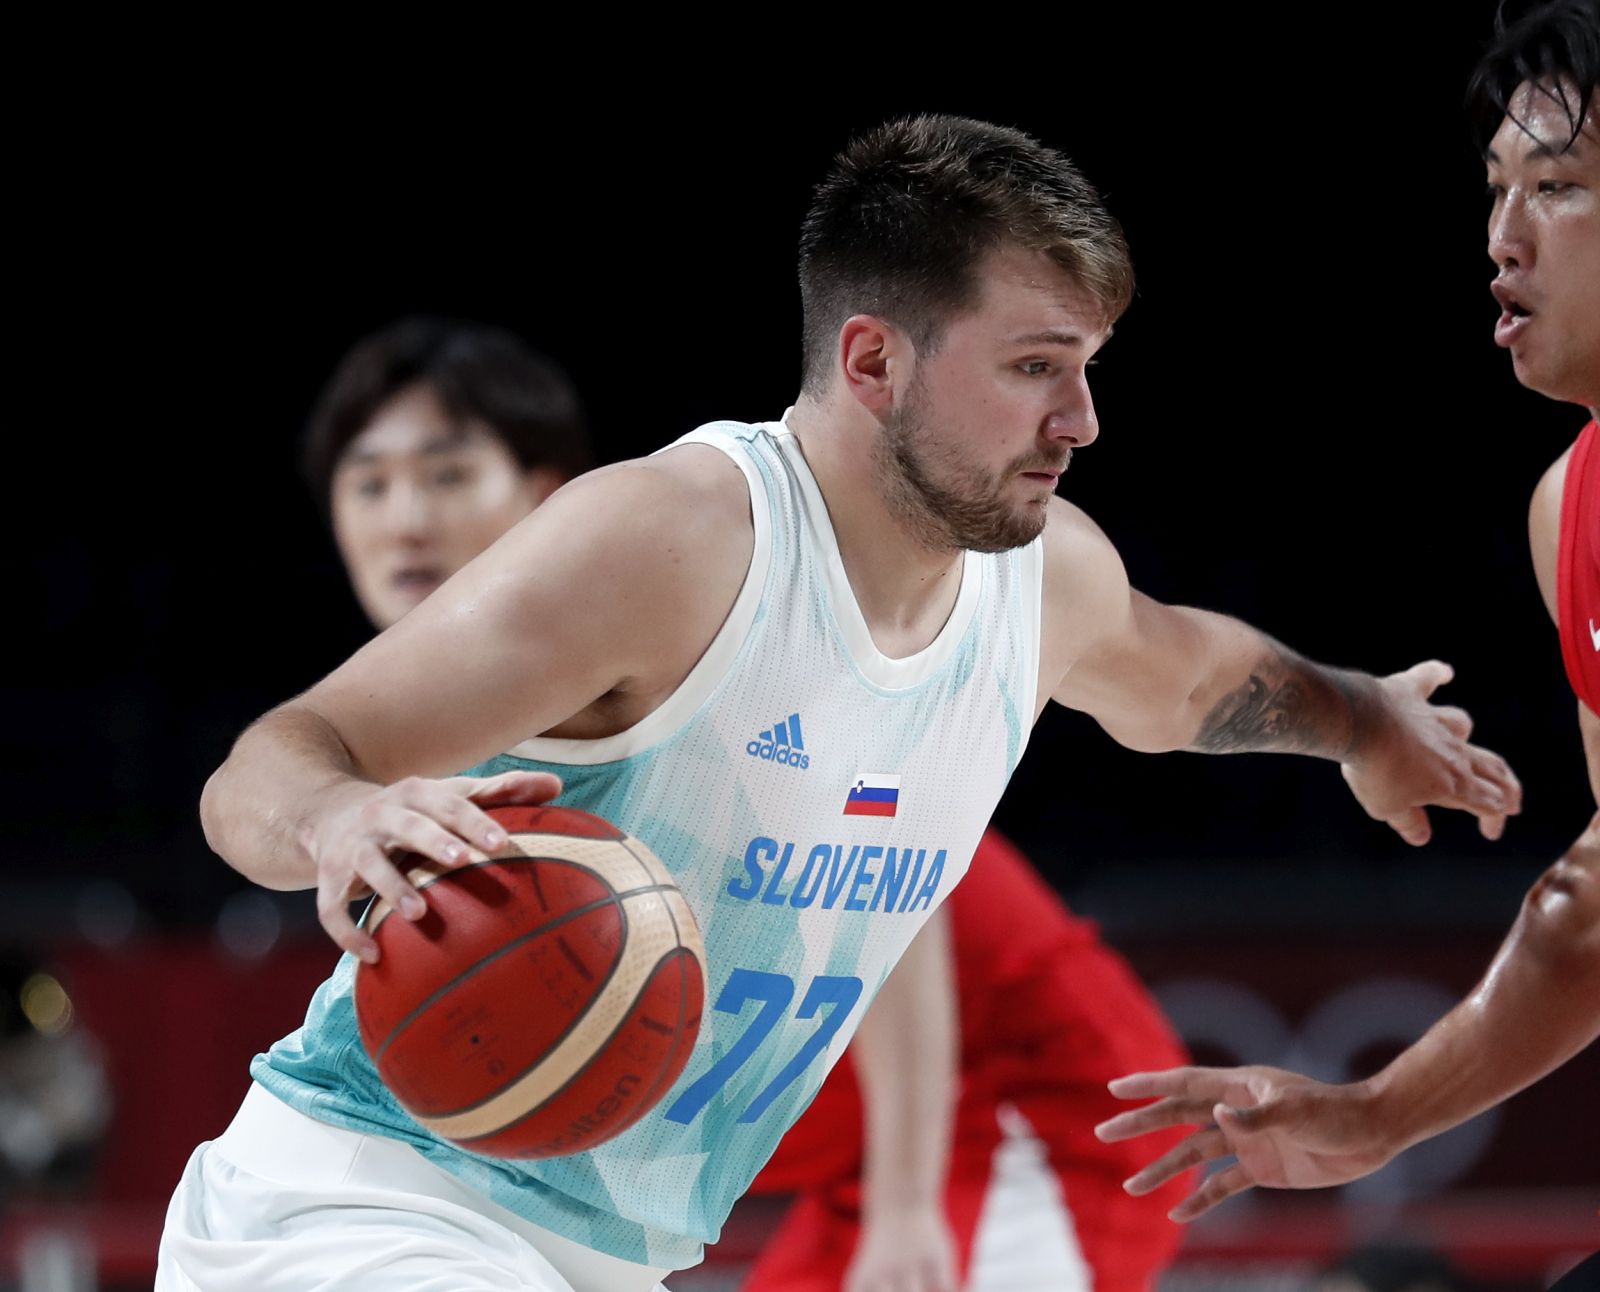 epa09375943 Luka Doncic (L) of Slovenia in action against Yudai Baba (R) of Japan in the men's preliminary round Group C match between Slovenia and Japan during the Basketball events of the Tokyo 2020 Olympic Games at the Saitama Super Arena in Saitama, Japan, 29 July 2021.  EPA/KIYOSHI OTA